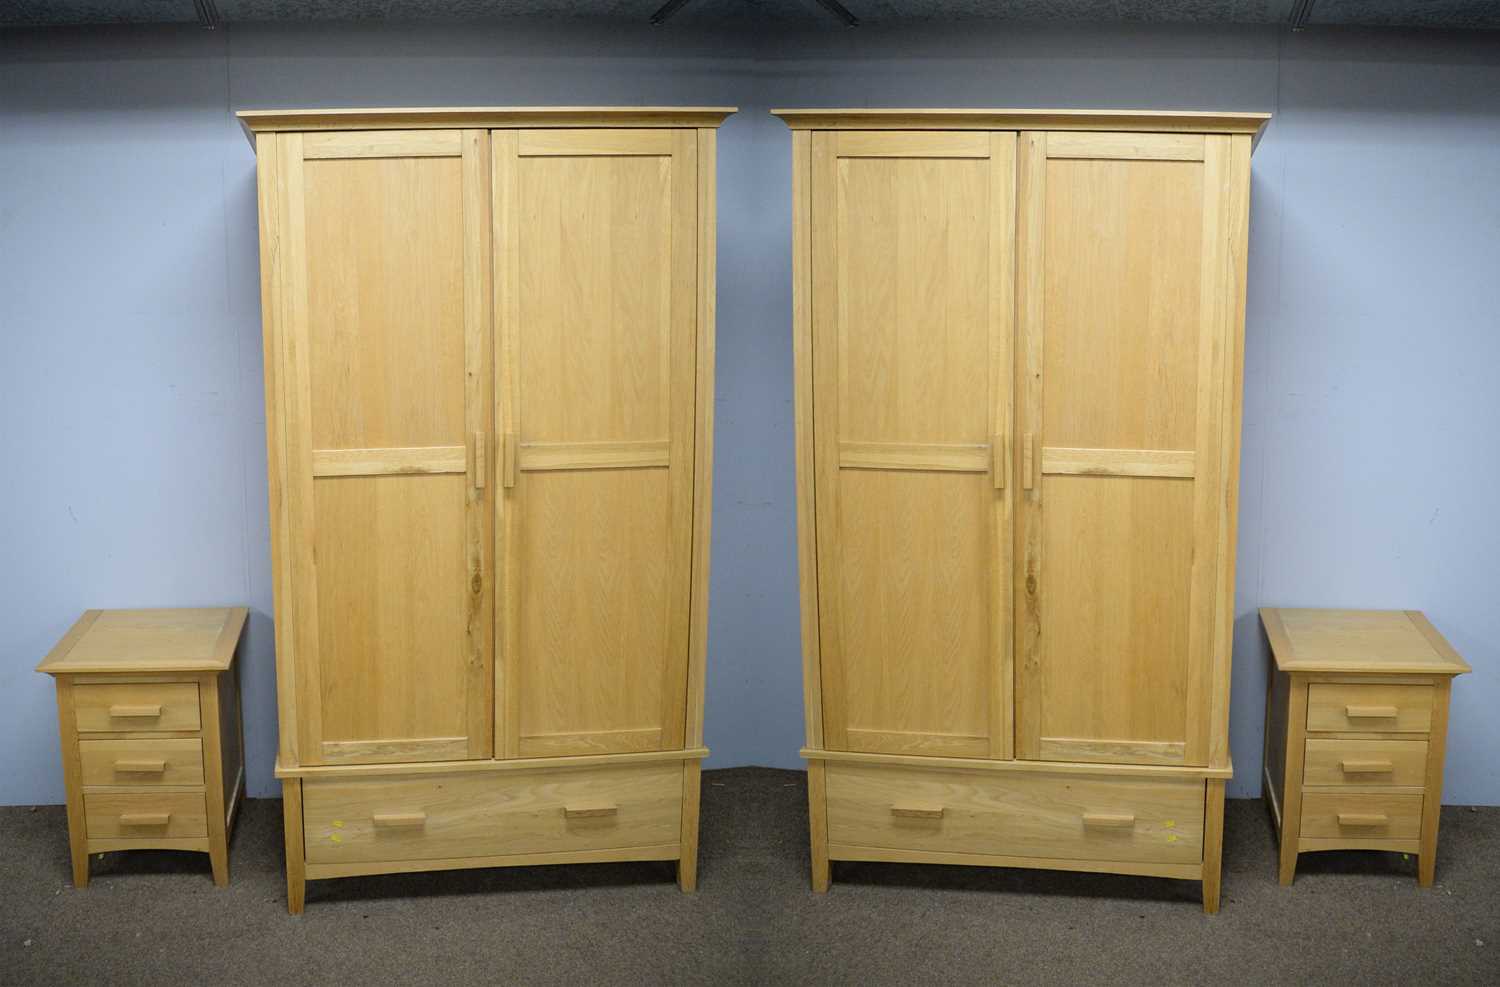 Lot 110 - Pair of Barker and Stonehouse oak wardrobes and pair of bedside cabinets